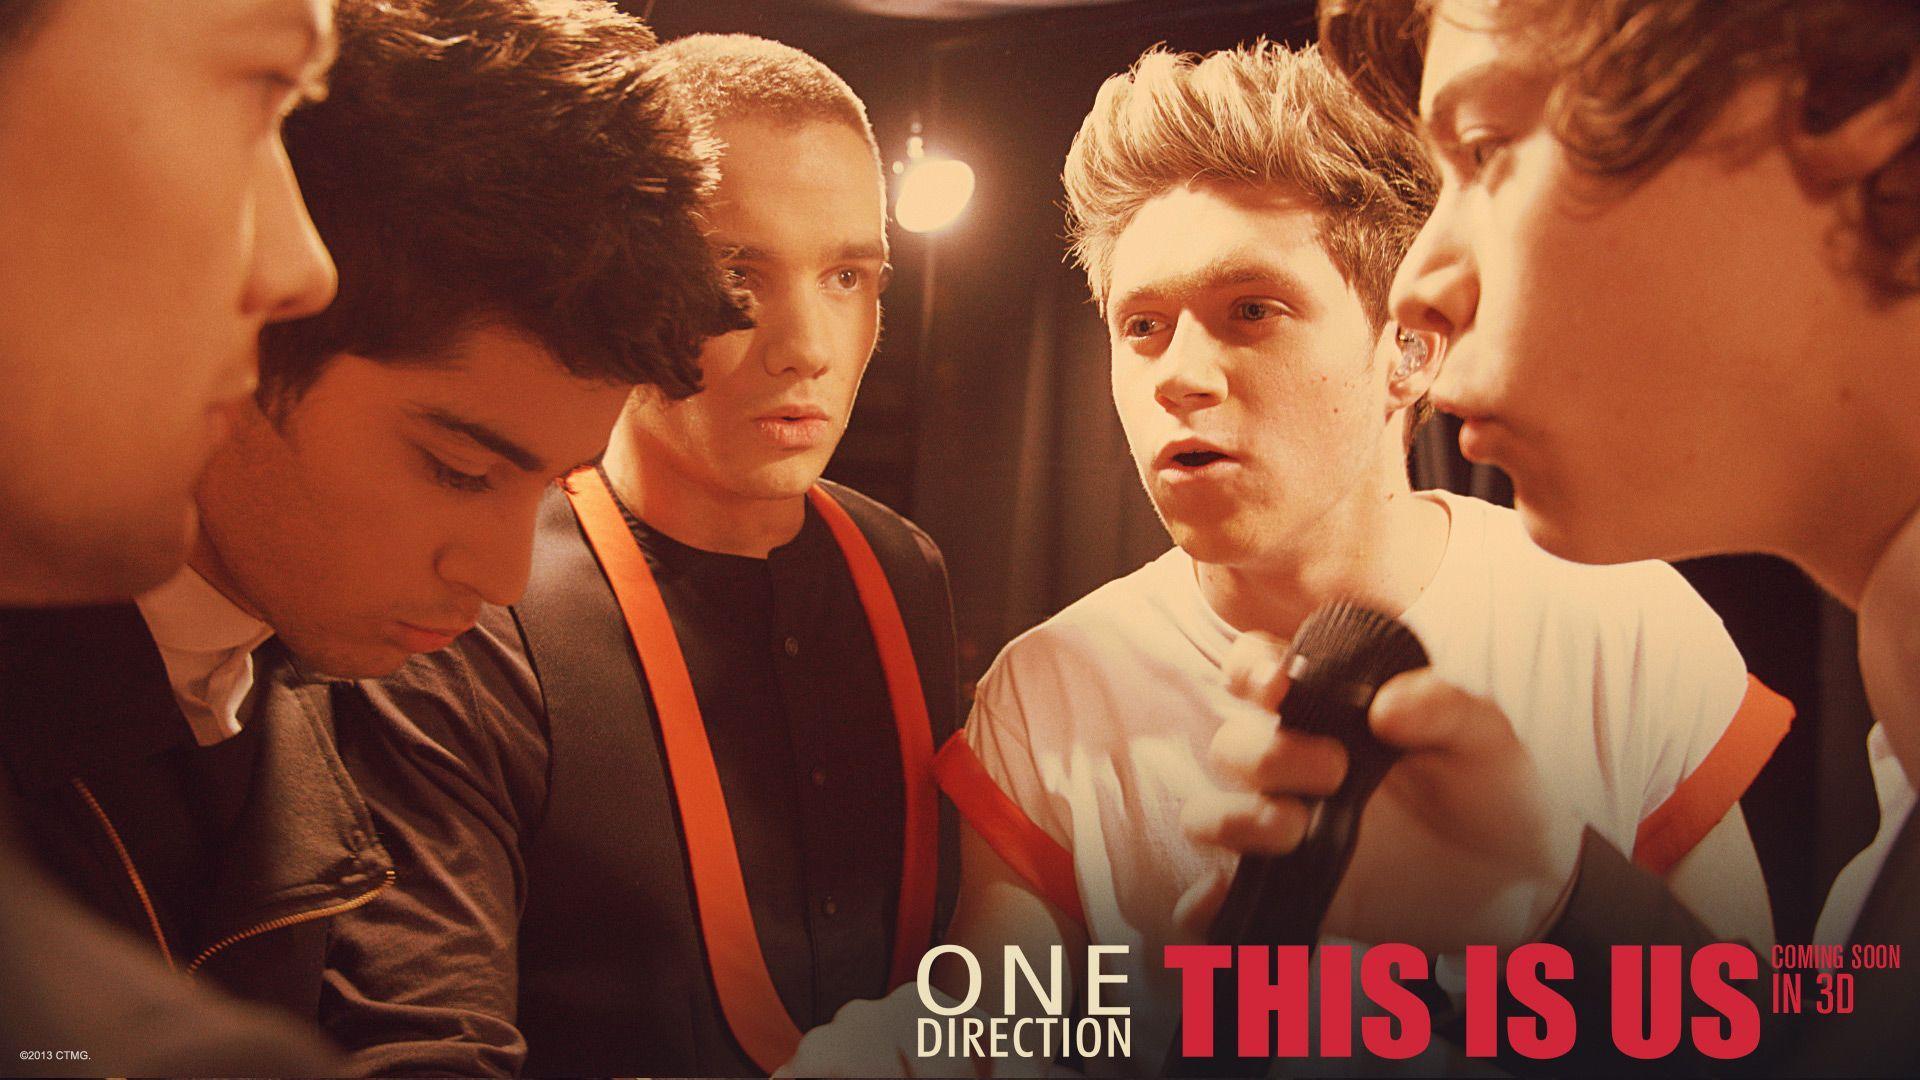 One Direction movie Is Us Official wallpaper. Movie